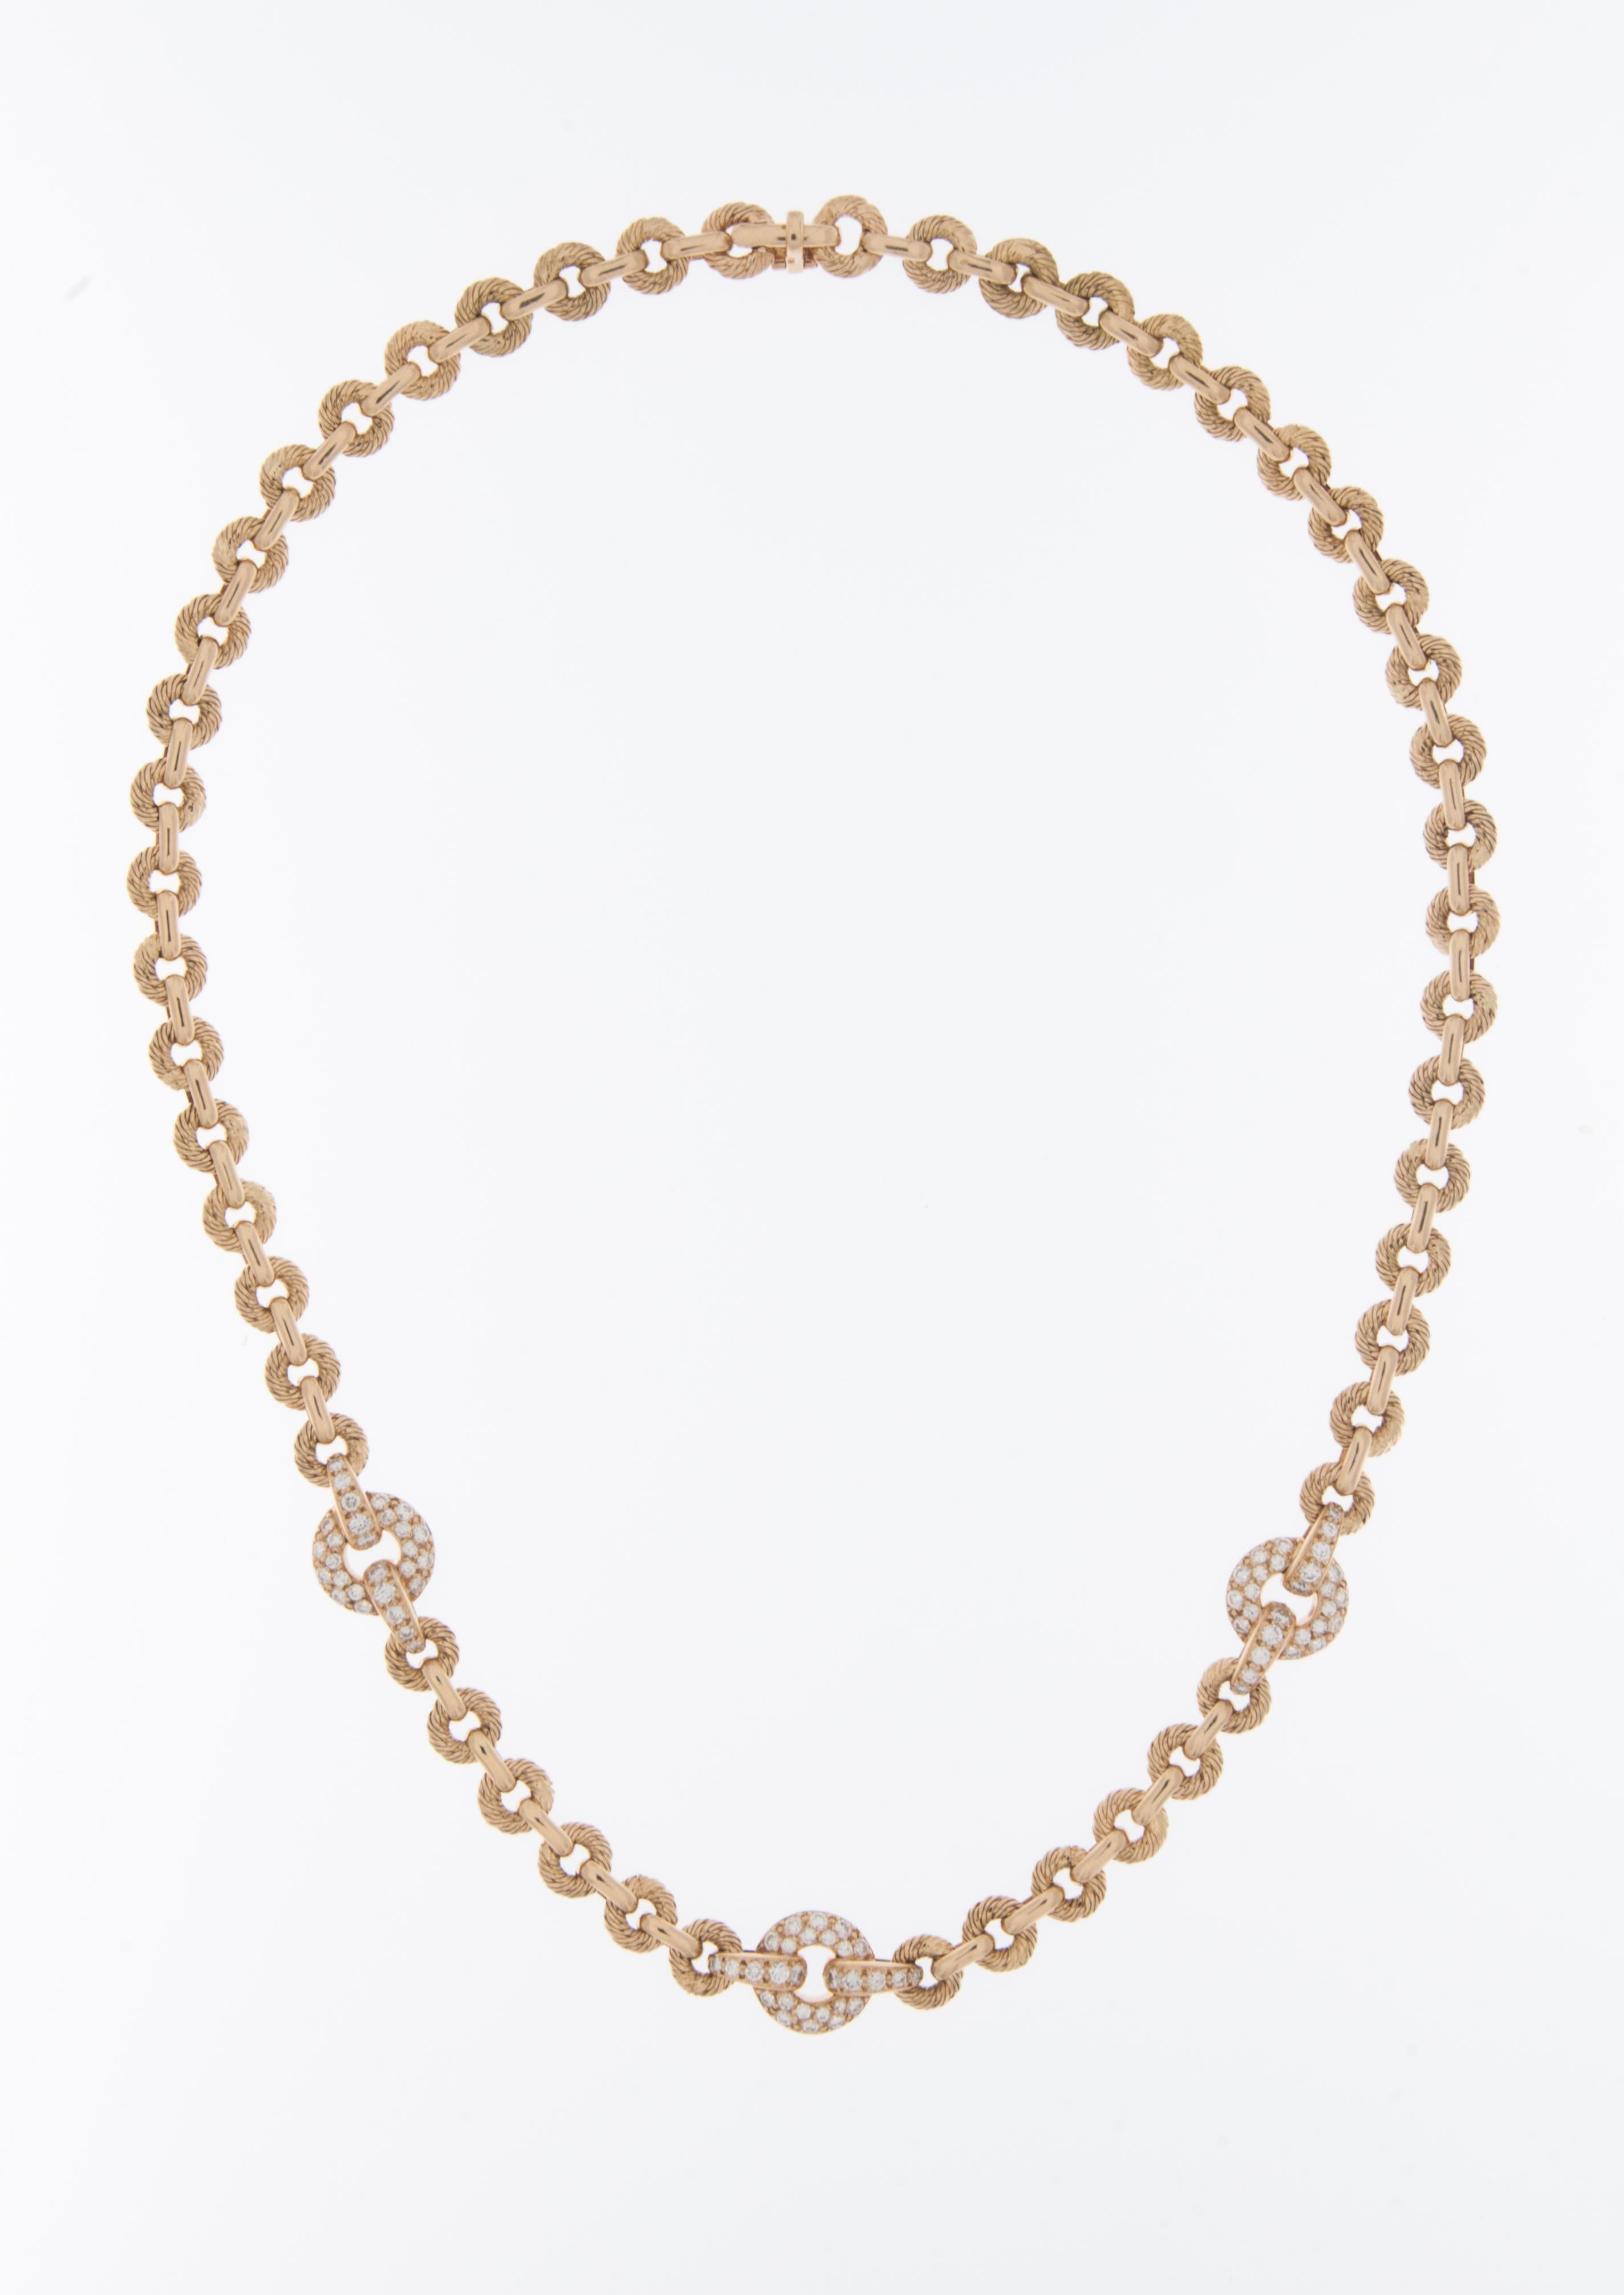 The Retro 18kt French Necklace with Diamonds is a stunning piece of jewelry that exudes elegance and vintage charm. Crafted from high-quality 18-karat gold, this necklace showcases the exquisite craftsmanship associated with French jewelry design.